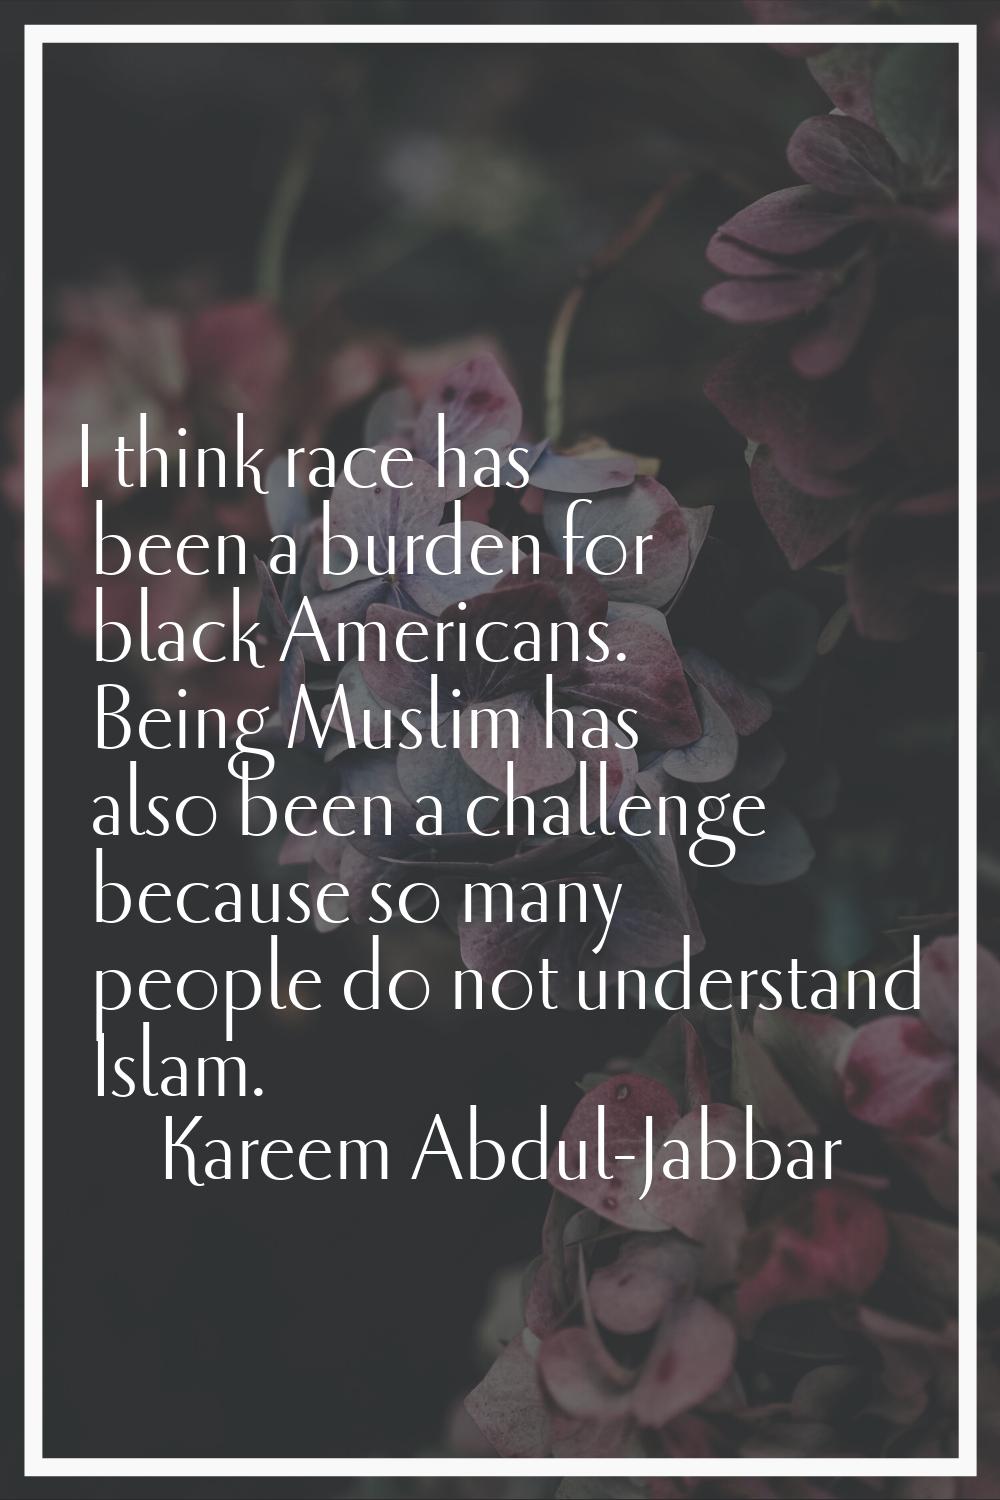 I think race has been a burden for black Americans. Being Muslim has also been a challenge because 